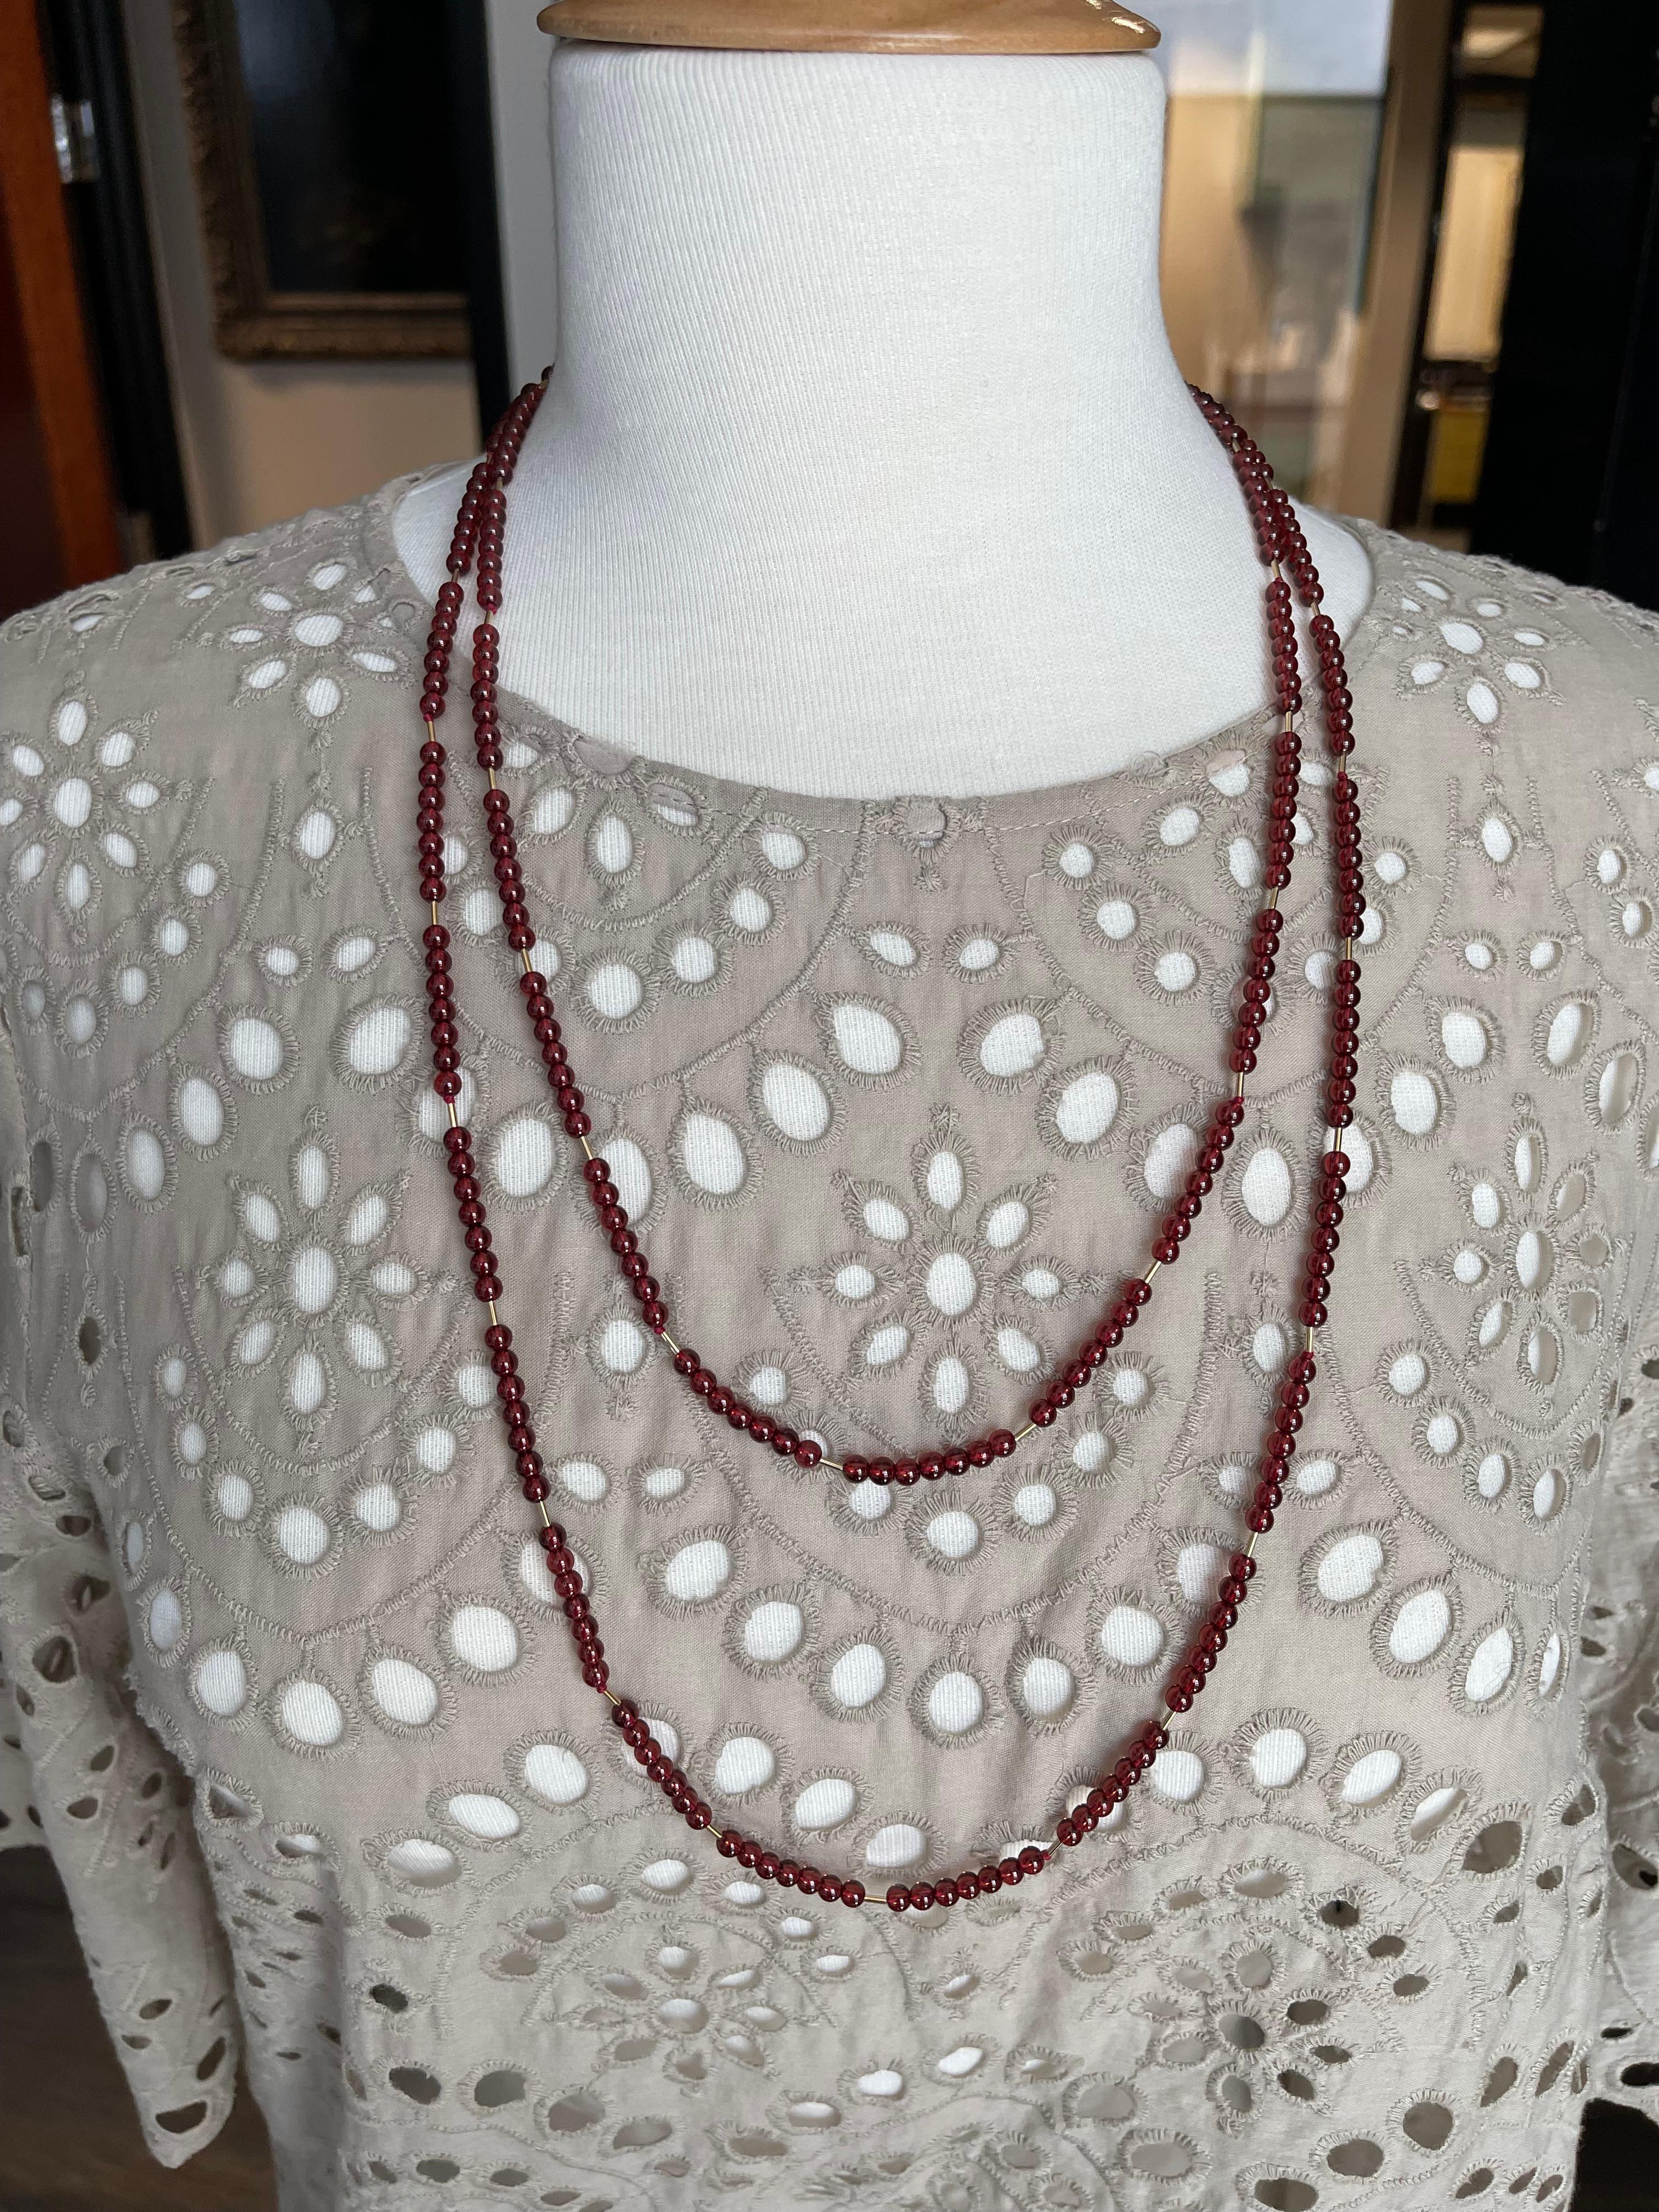 Cranberry Garnet Rope Necklace with Yellow Gold Accents & Clasp, 54 Inches For Sale 1